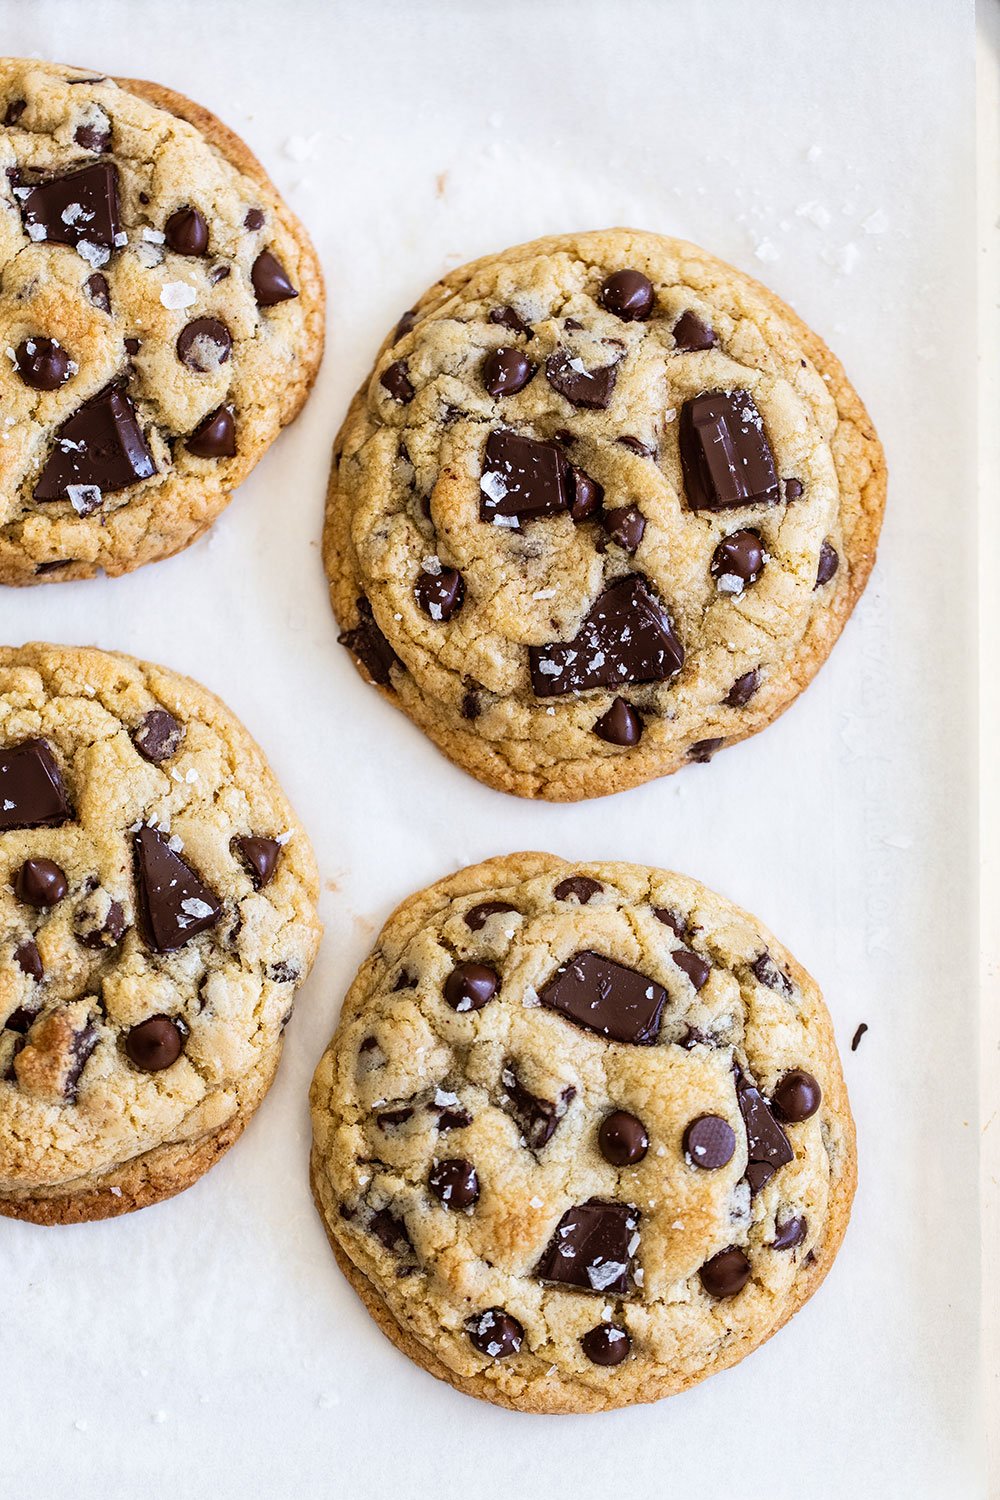 Four giant chocolate chip cookies